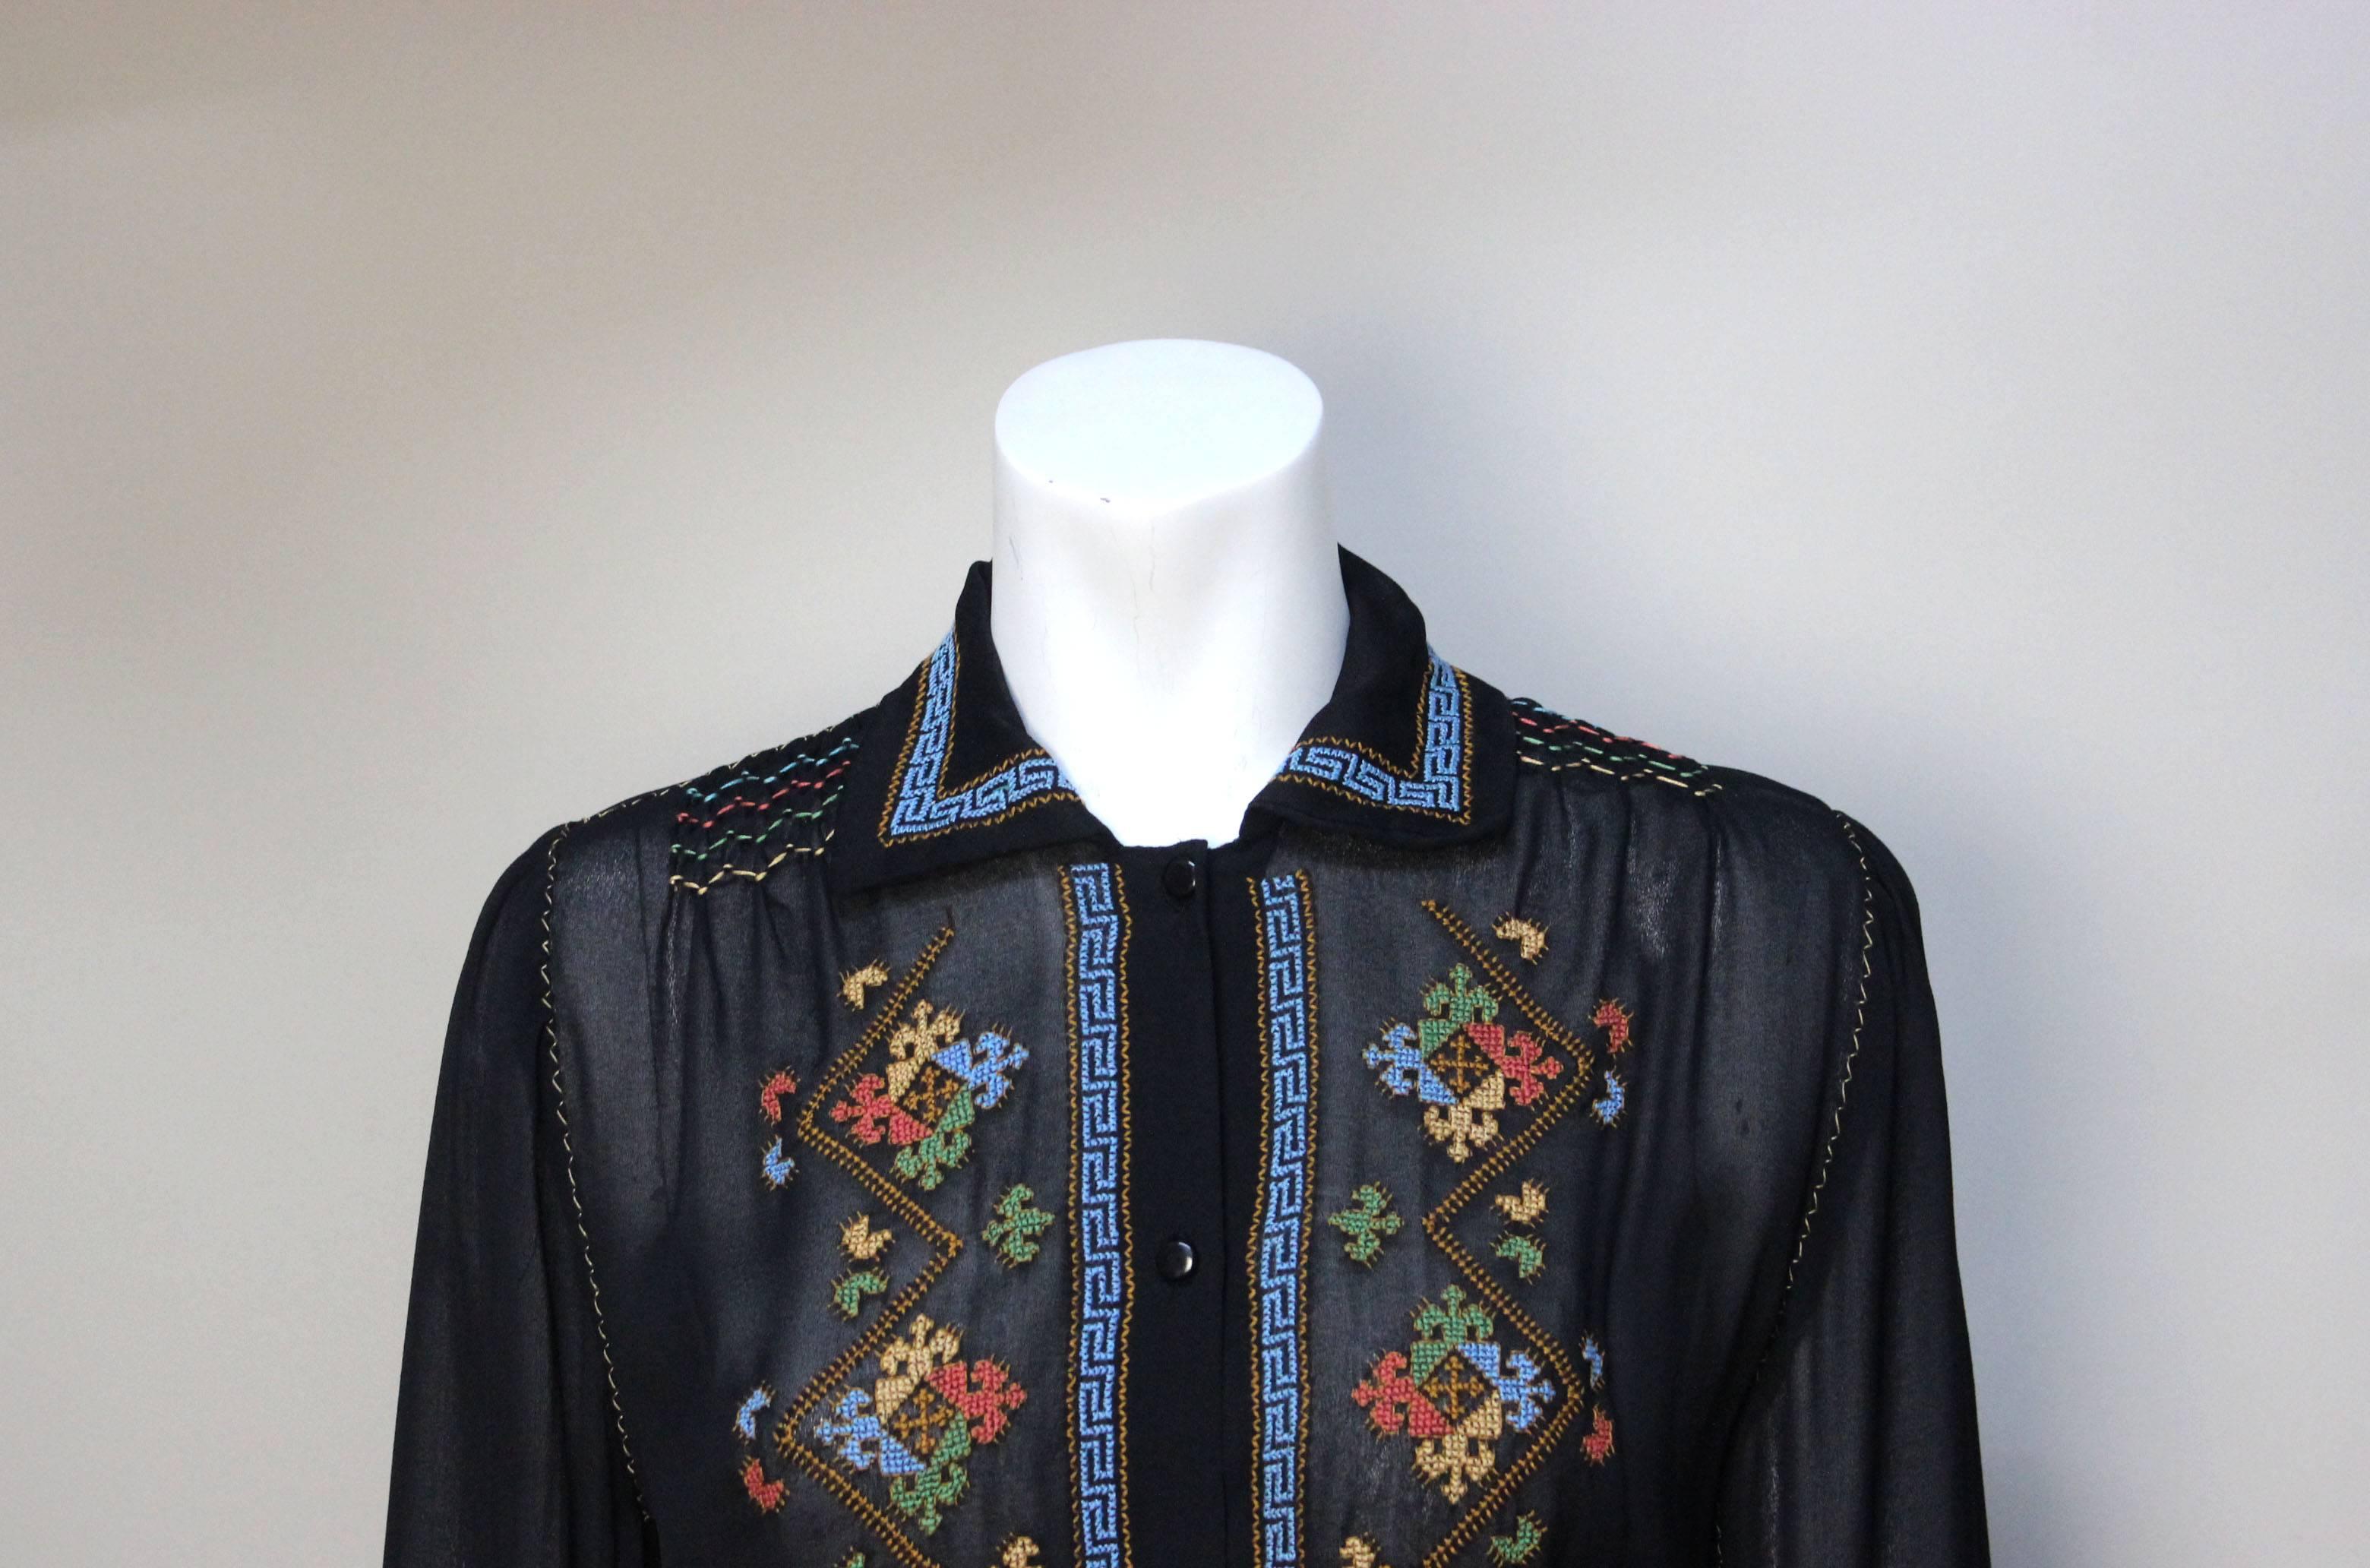 Exquisite Vintage Black Sheer Crepe Peasant Hand Embroidered Blouse 1